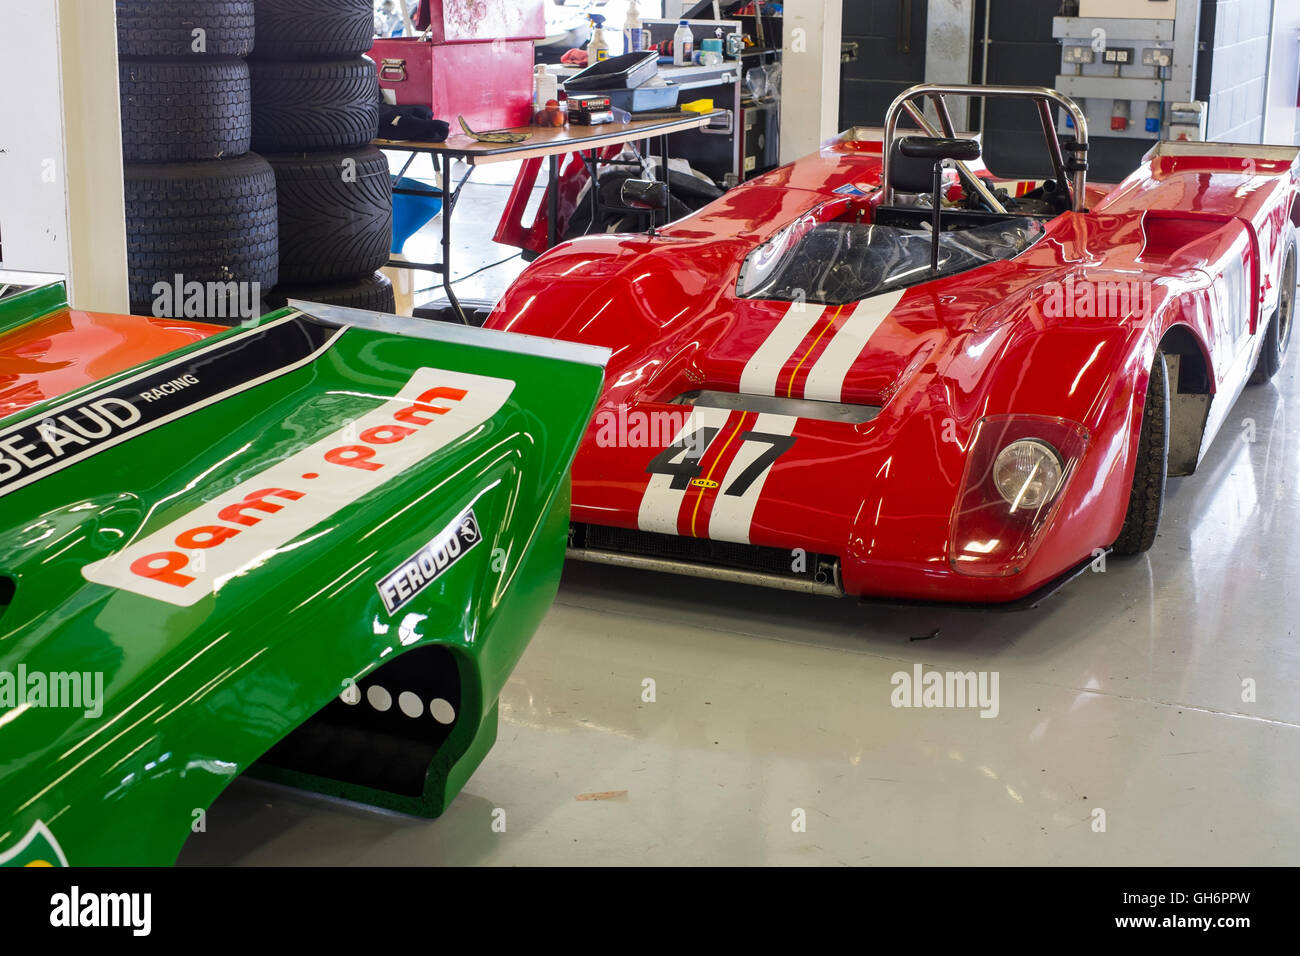 A Lola T10 sports car in the pits at 2016 Silverstone Classic event, England, UK Stock Photo